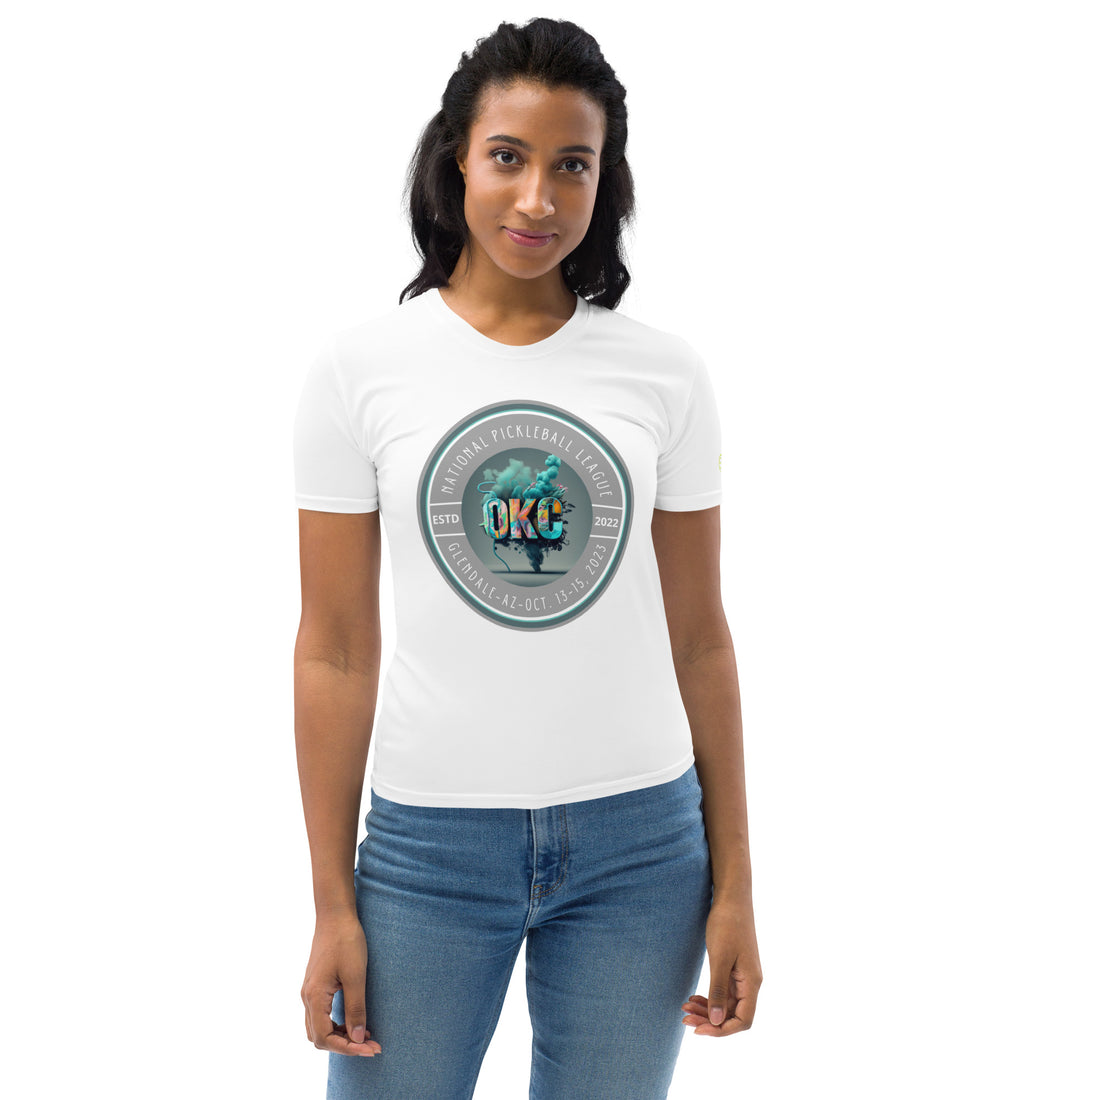 Introducing the OKC Punishers™ NPL™ Championship Weekend Commemorative T-Shirt for Women - Turquoise Smoke with Bold Colors